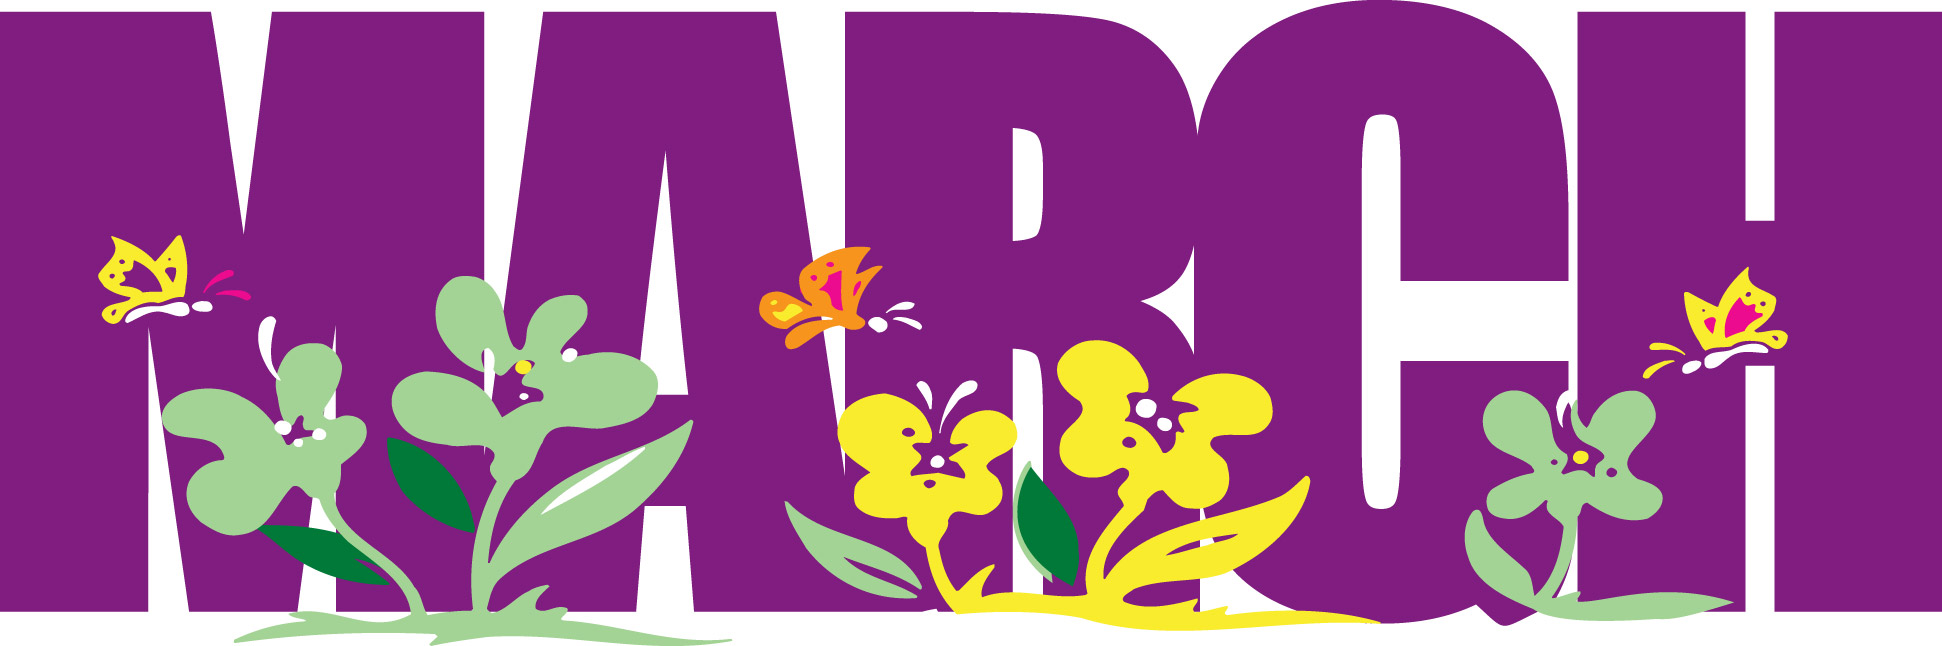 march clipart banner